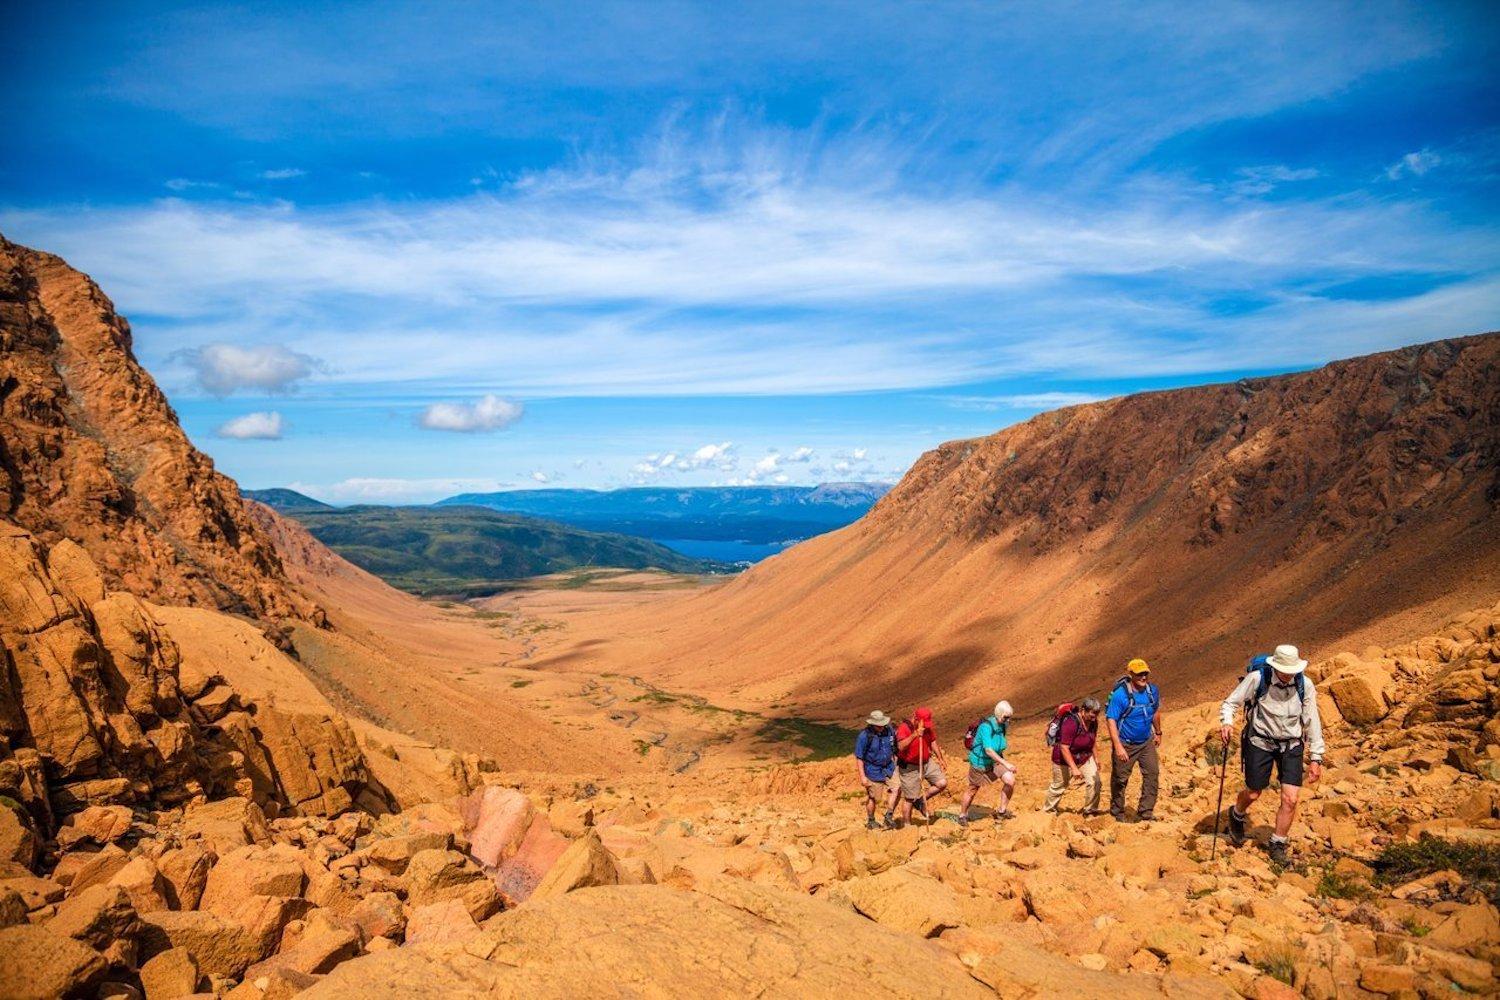 Gros Morne National Park, where you can walk on the Earth's exposed mantle at the Tablelands, turns 50 this year.